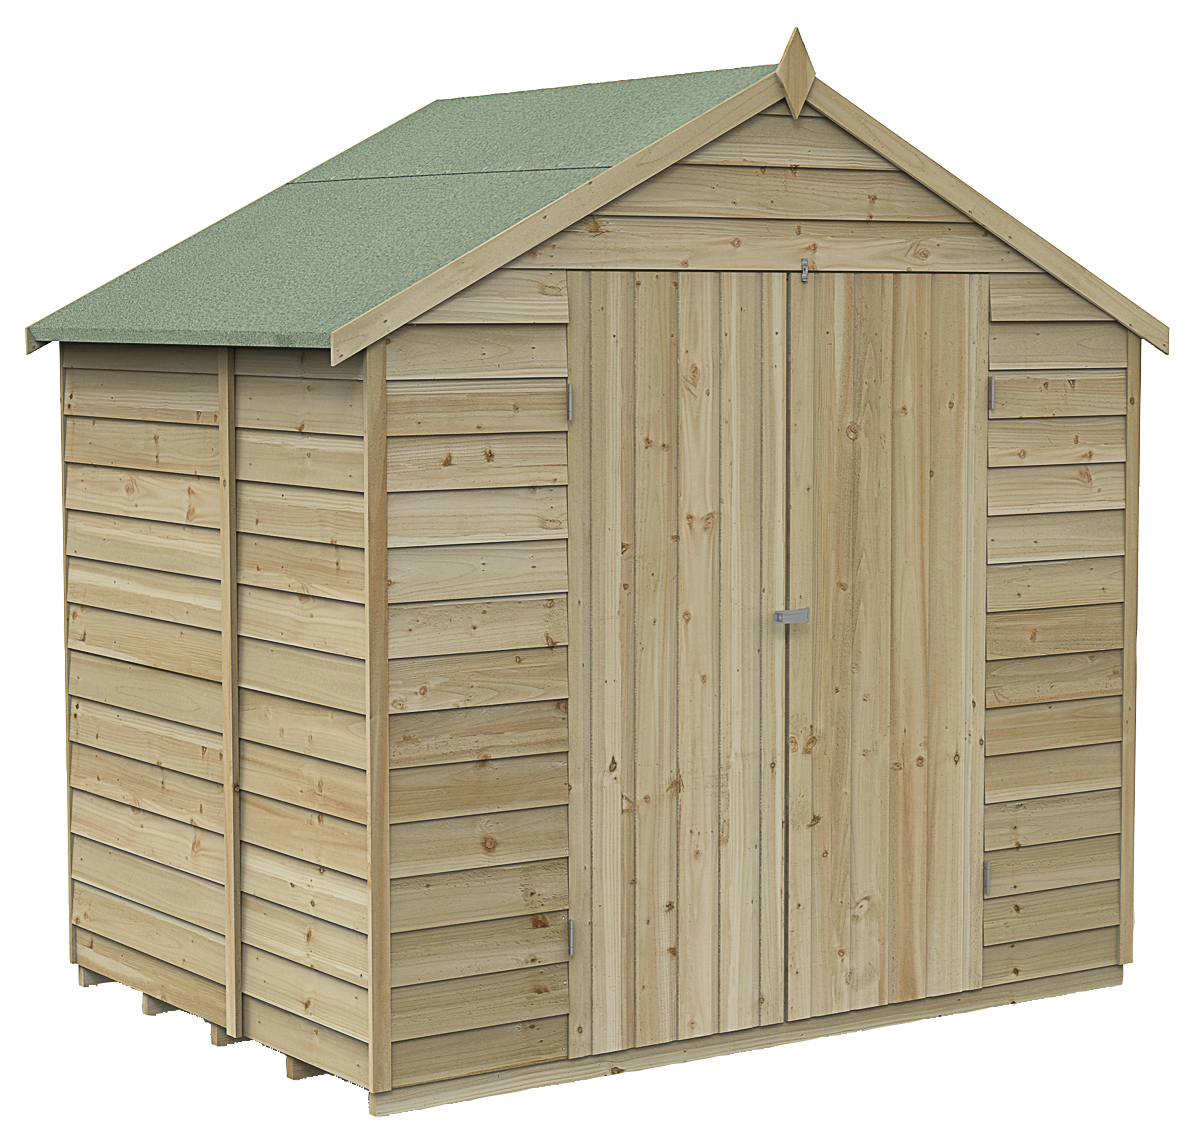 Image of Forest Garden 7 x 5ft 4Life Apex Overlap Pressure Treated Double Door Windowless Shed with Base and Assembly